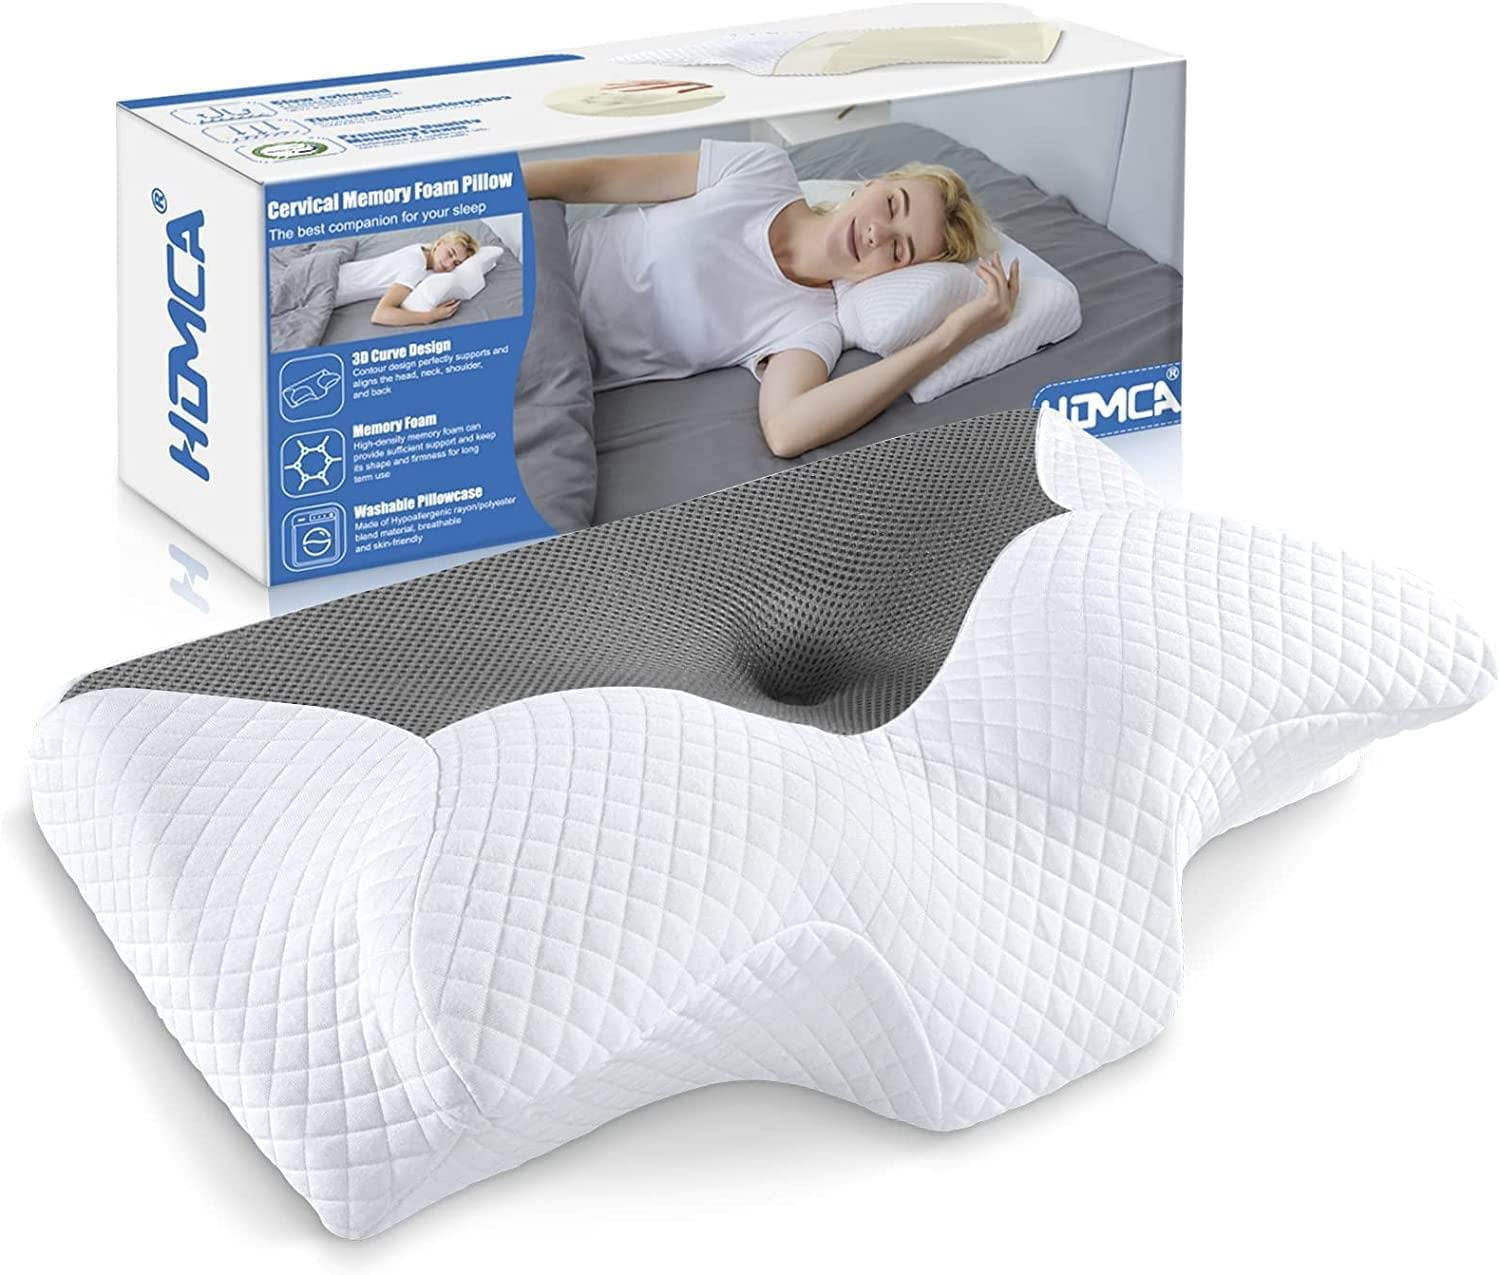 Orthopaedic Memory Foam Pillow by Feature Home® Cervical Support Pillow  Deep Sleep Neck Comfort Pillow Soft Quilt Lining Bamboo Pillow 